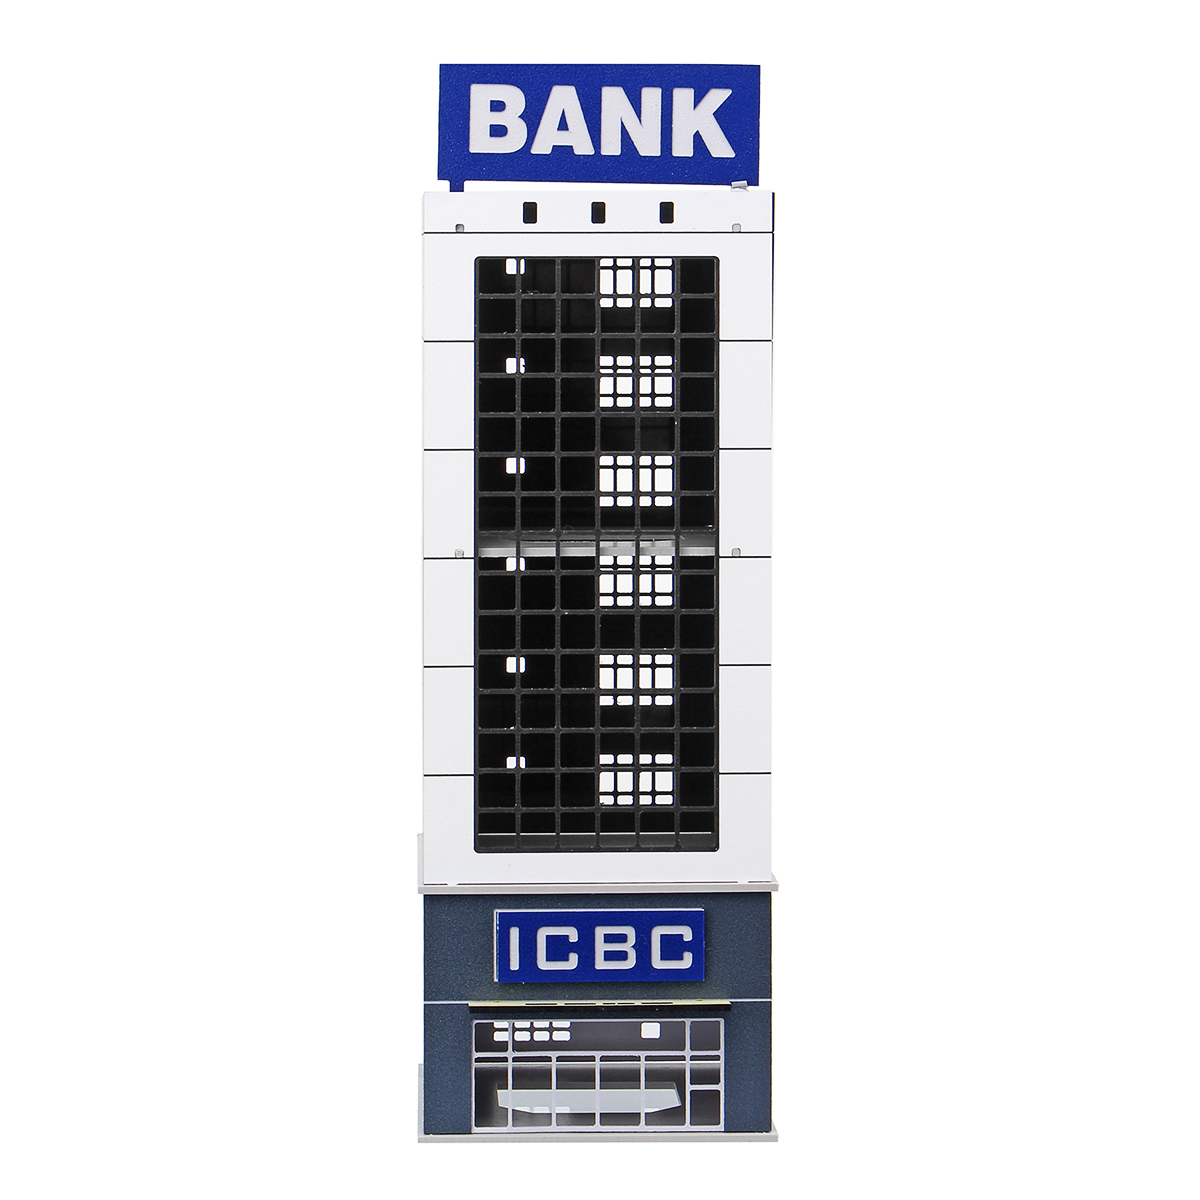 1150-Outland-Modern-Building-Model--Bank-N-Scale-for-GUNDAM-Gifts-1393015-2